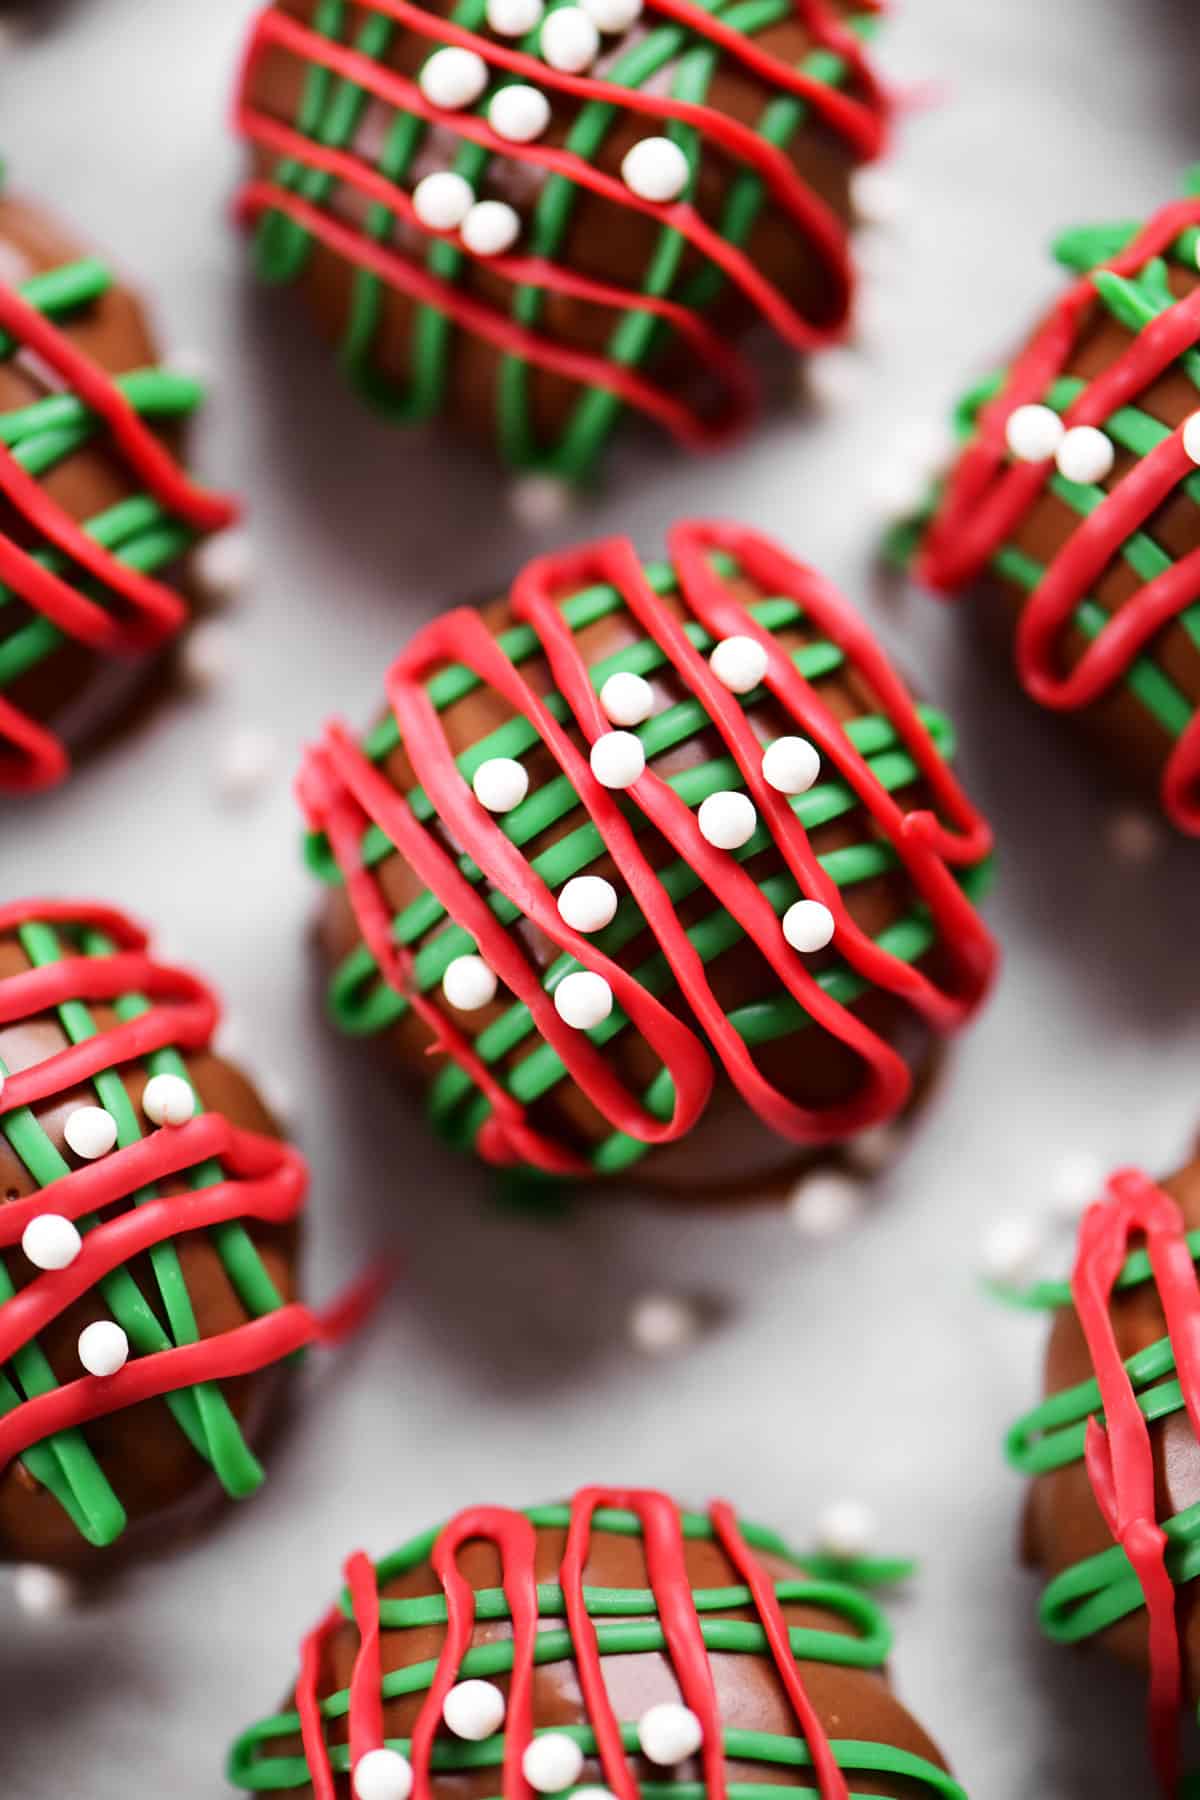 chocolate covered peanut butter balls with red and green drizzles on top.